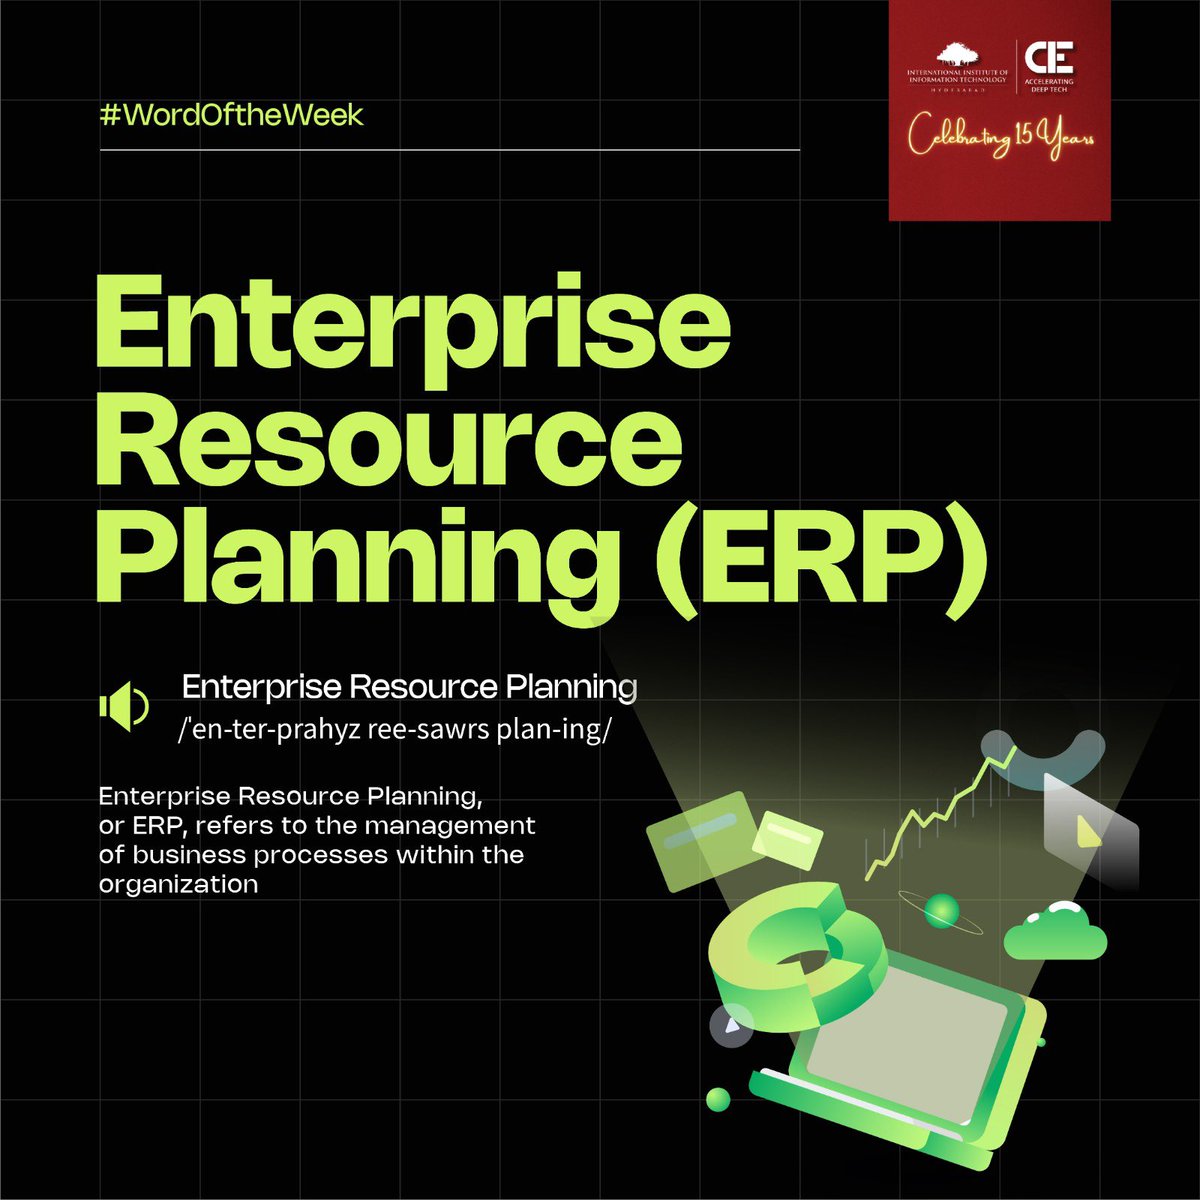 Discover the impact of Enterprise Resource Planning on businesses! Dive deeper into this strategy and uncover its benefits. Stay tuned for more industry insights!
.
.
.
#CIE #IIITH #WordOfTheWeek